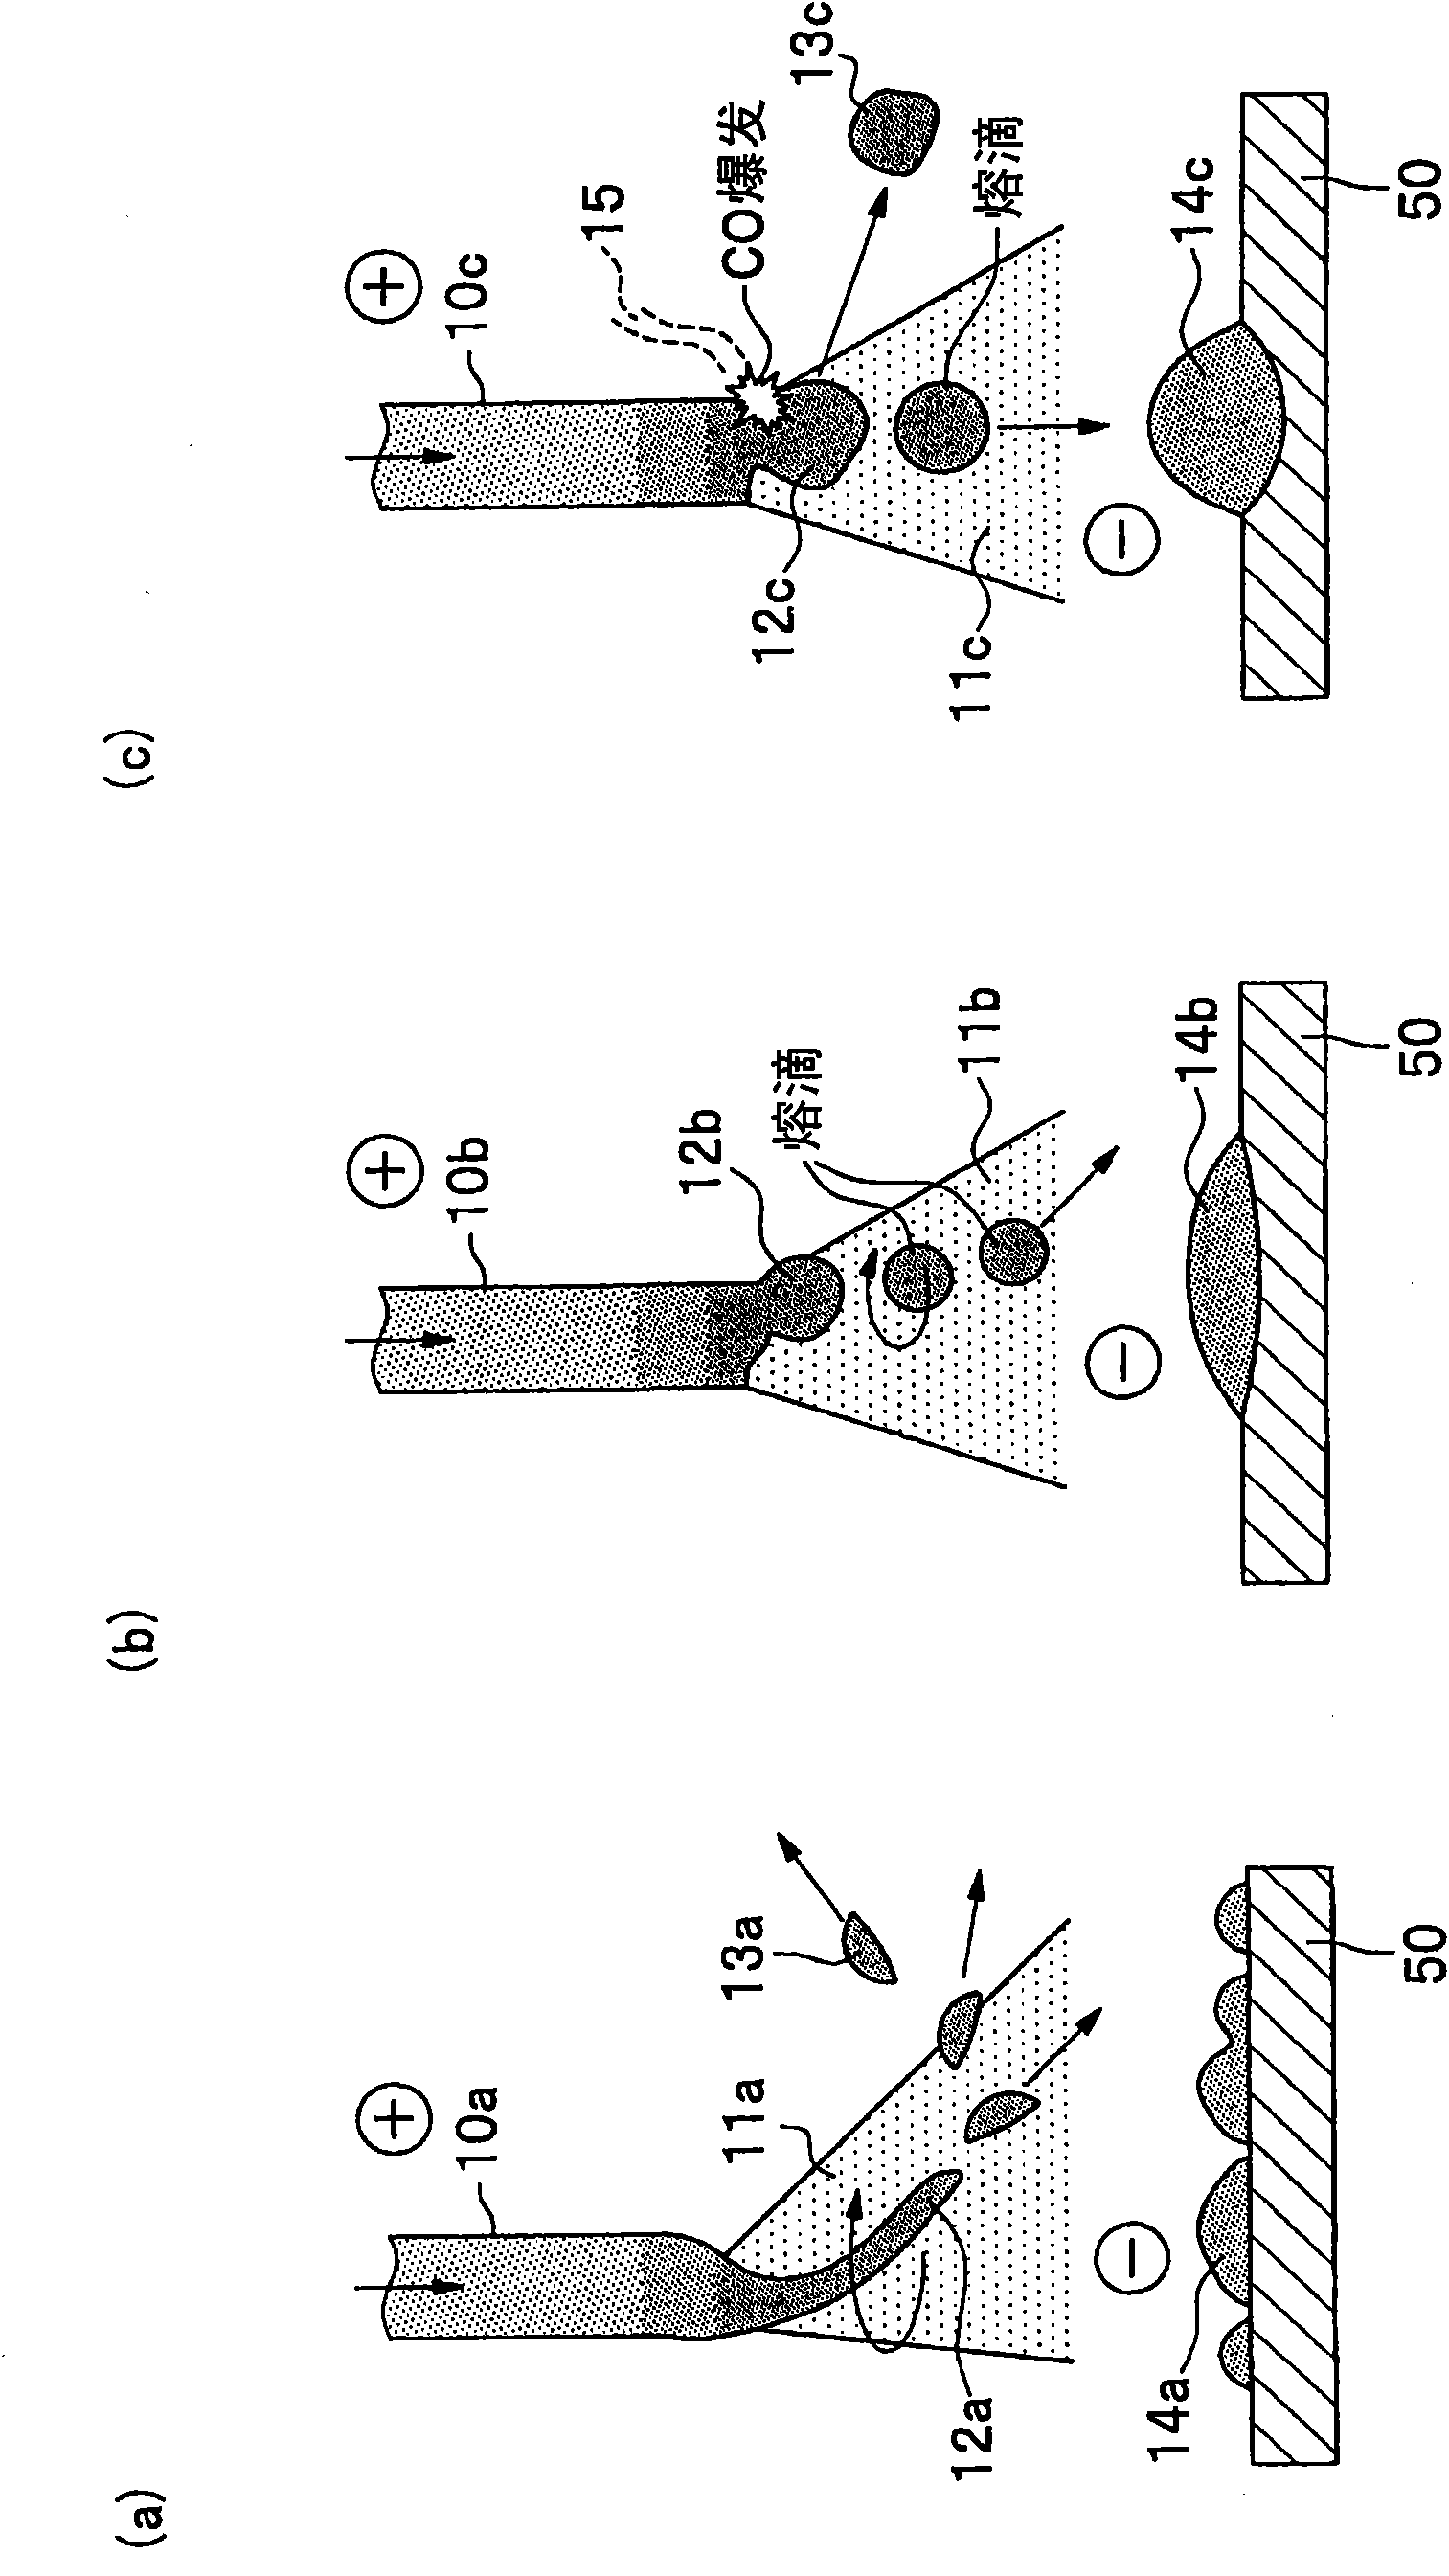 Hardfacing MIG-arc welding wire and hardfacing MIG-arc welding process